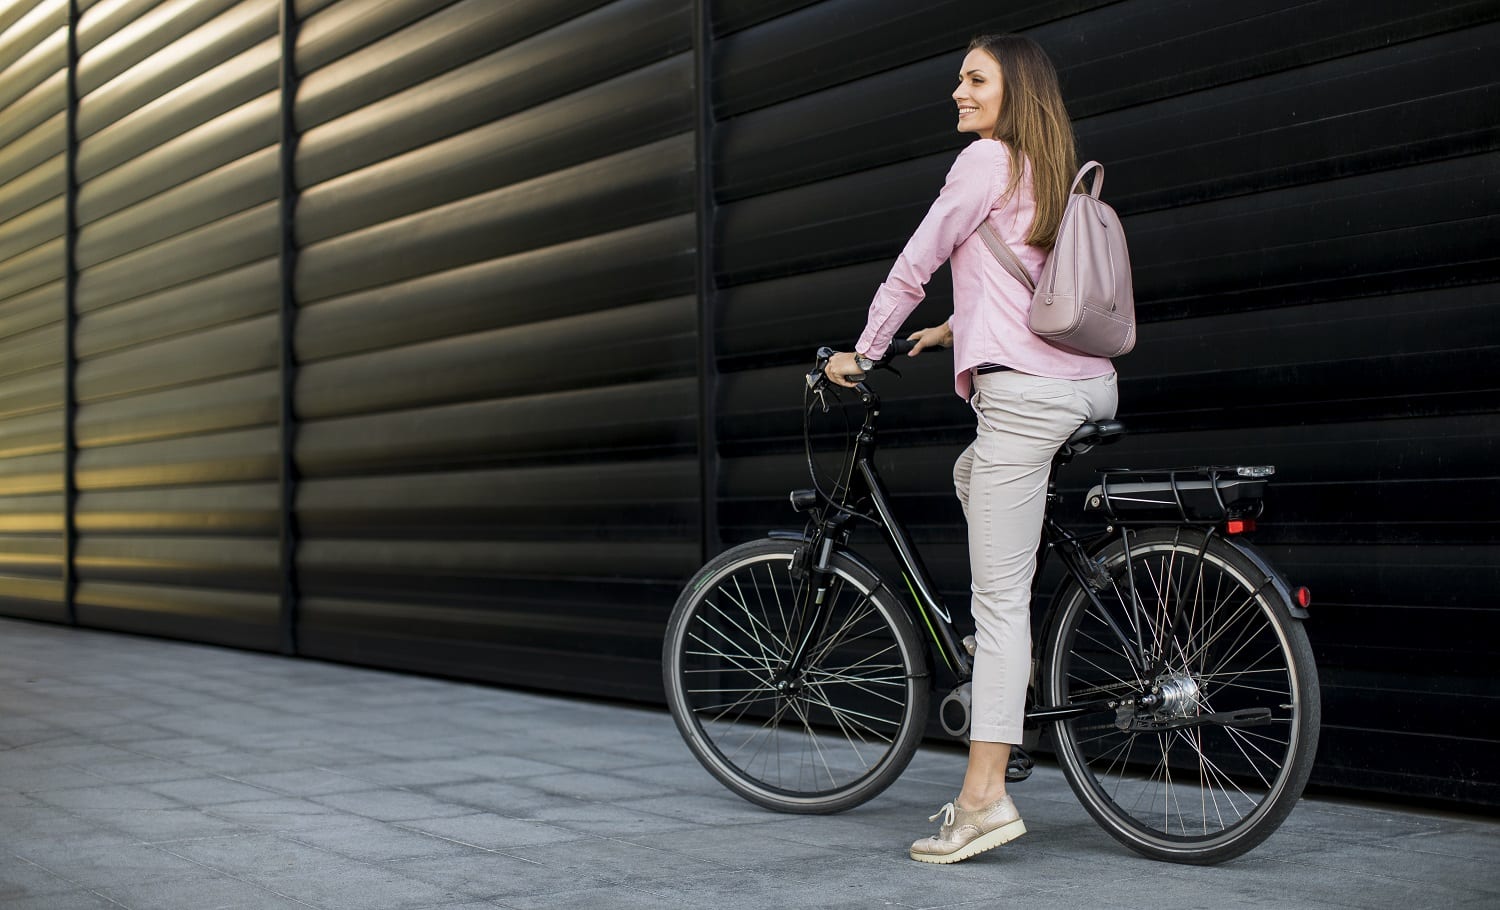 Pretty young woman riding an electric bicycle in urban environment